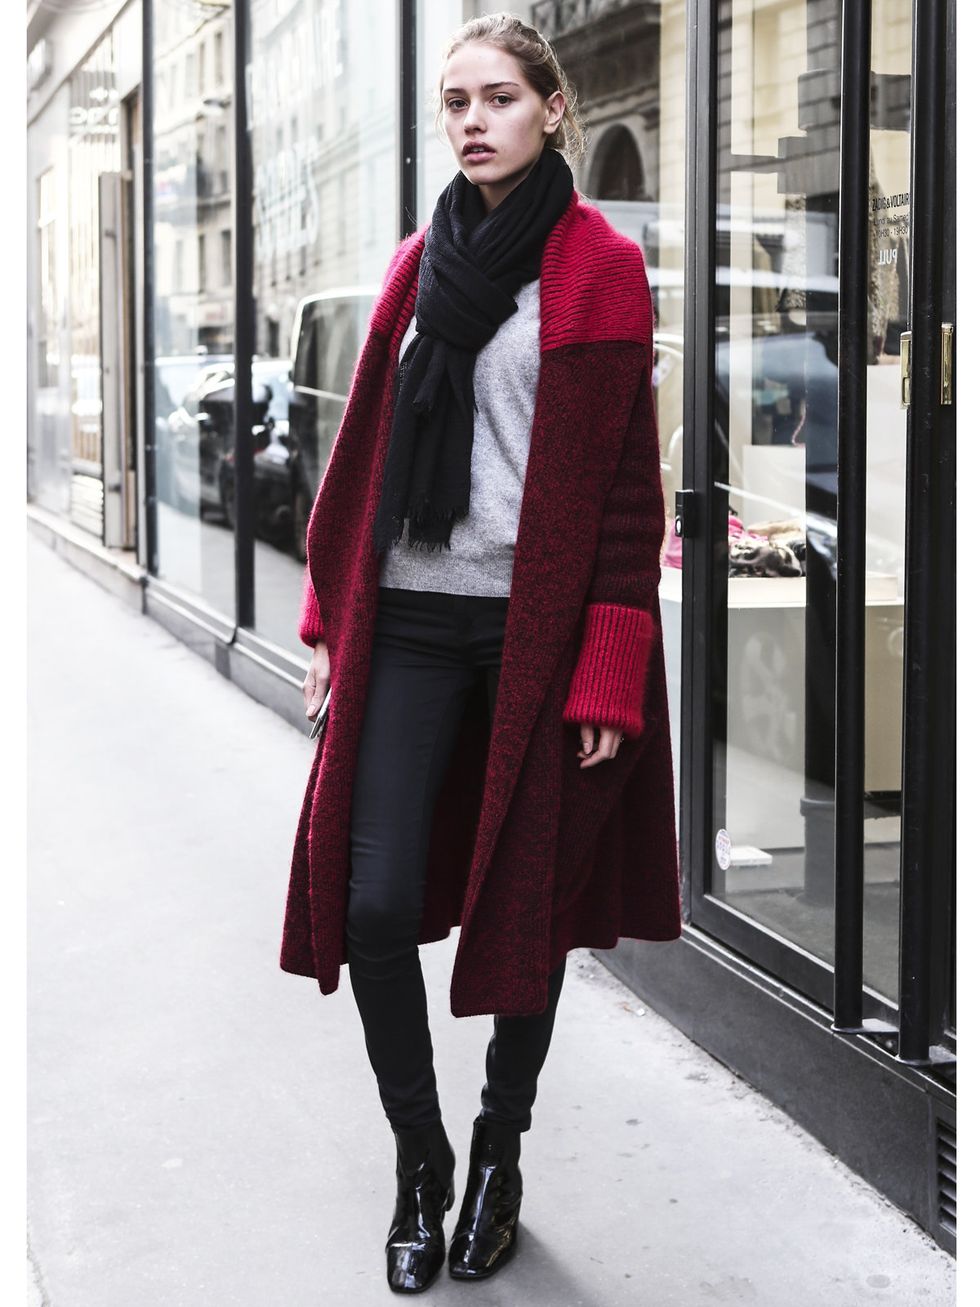 Winter, Textile, Outerwear, Style, Street fashion, Fashion accessory, Fashion, Pattern, Natural material, Maroon, 